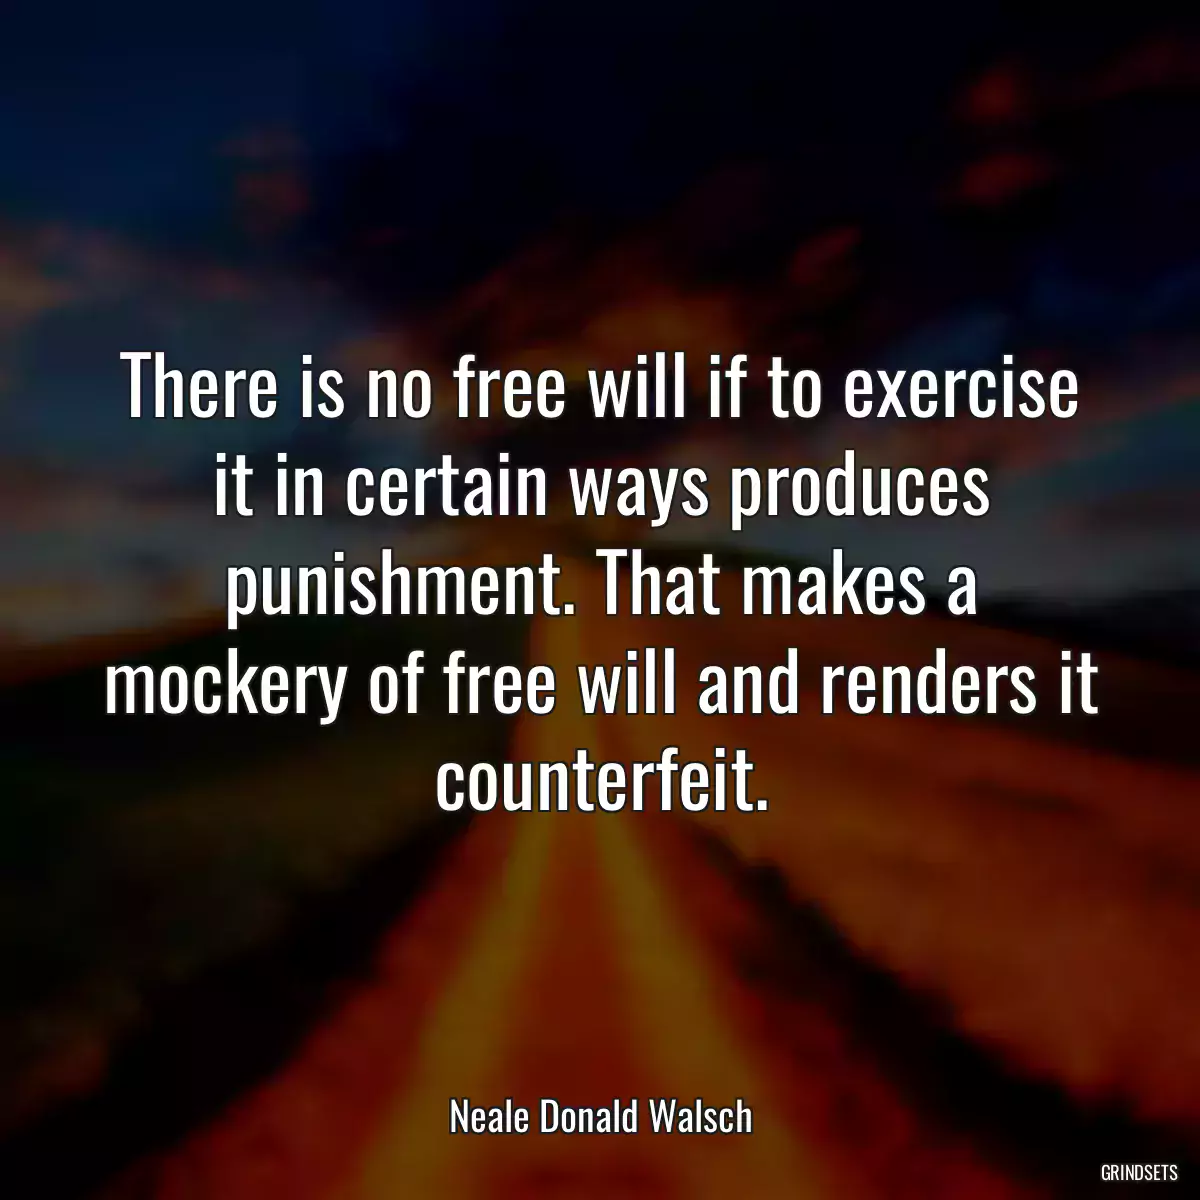 There is no free will if to exercise it in certain ways produces punishment. That makes a mockery of free will and renders it counterfeit.